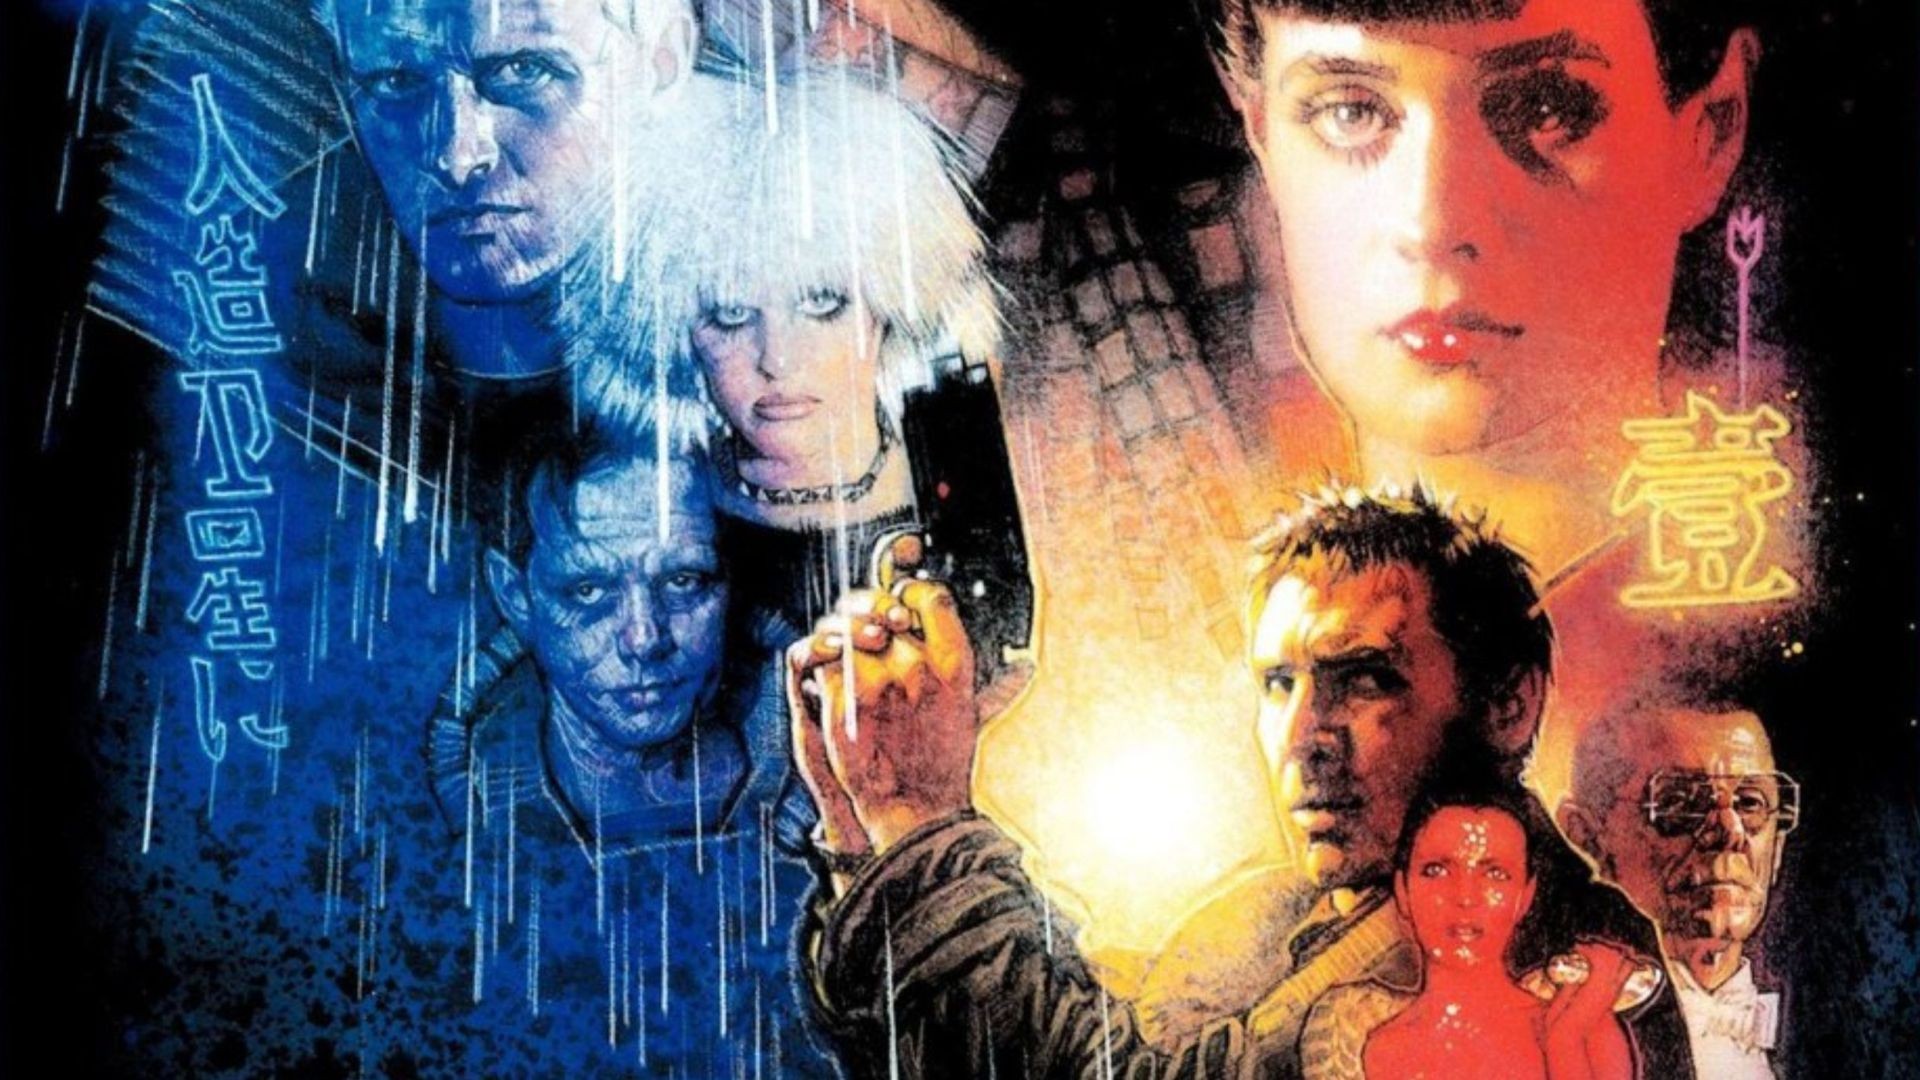 This Deleted Scene From Blade Runner Is Now The First Scene Of The Sequel